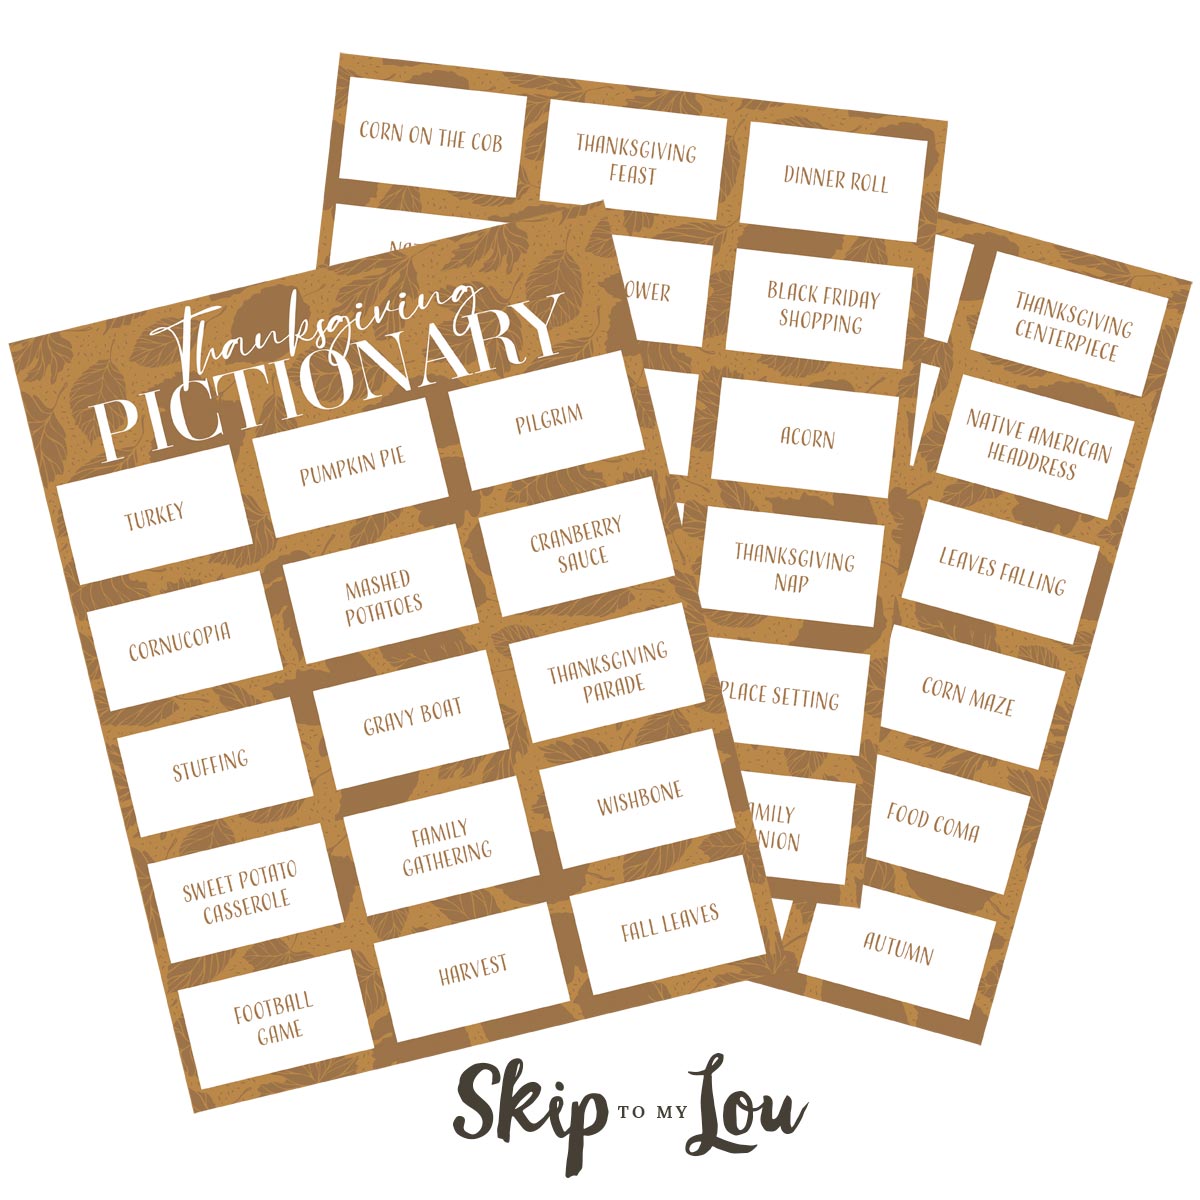 Thanksgiving Pictionary printable cards with random words to play with the entire family